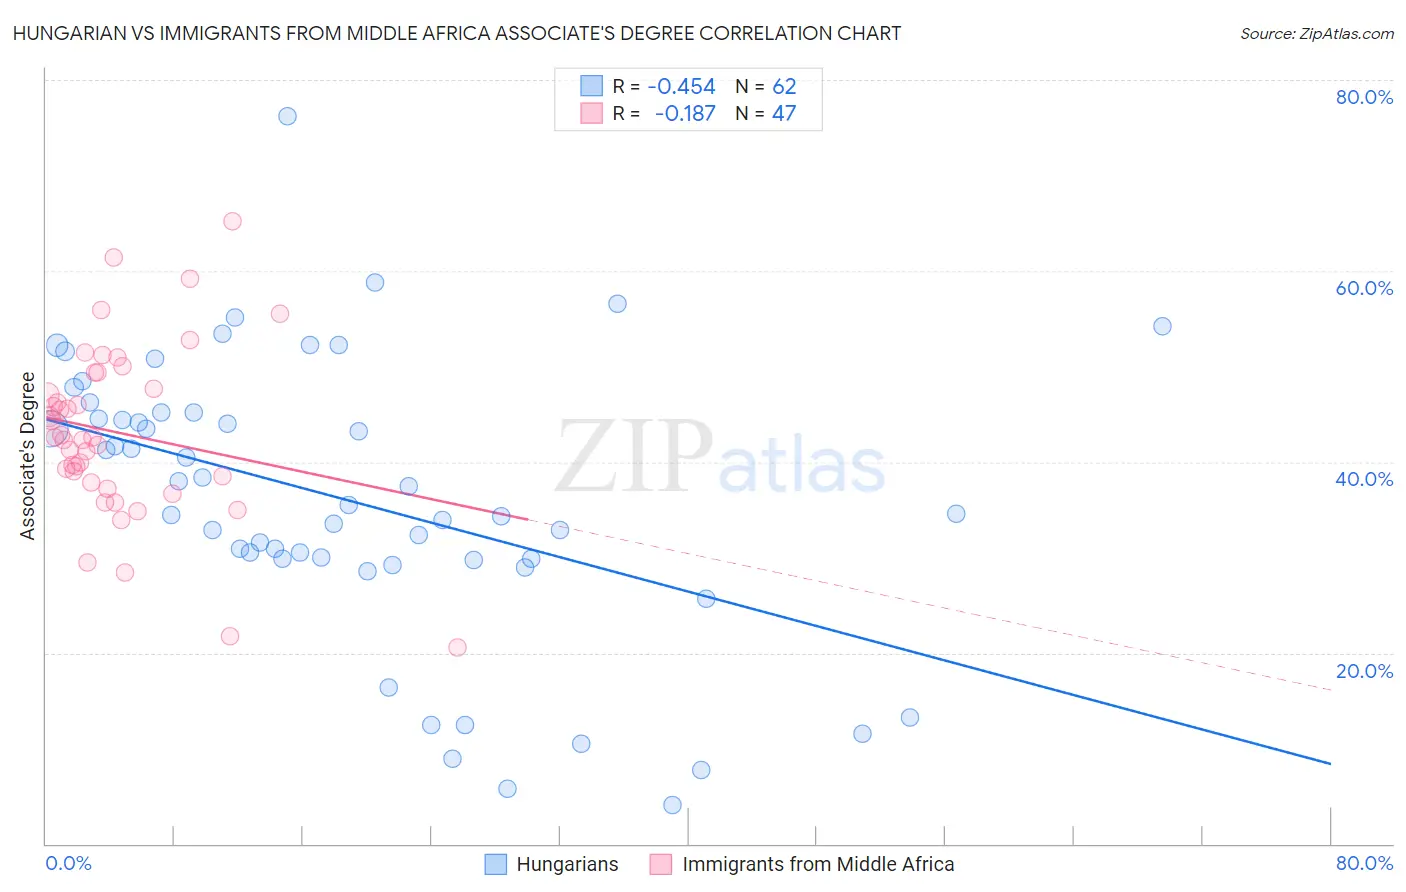 Hungarian vs Immigrants from Middle Africa Associate's Degree